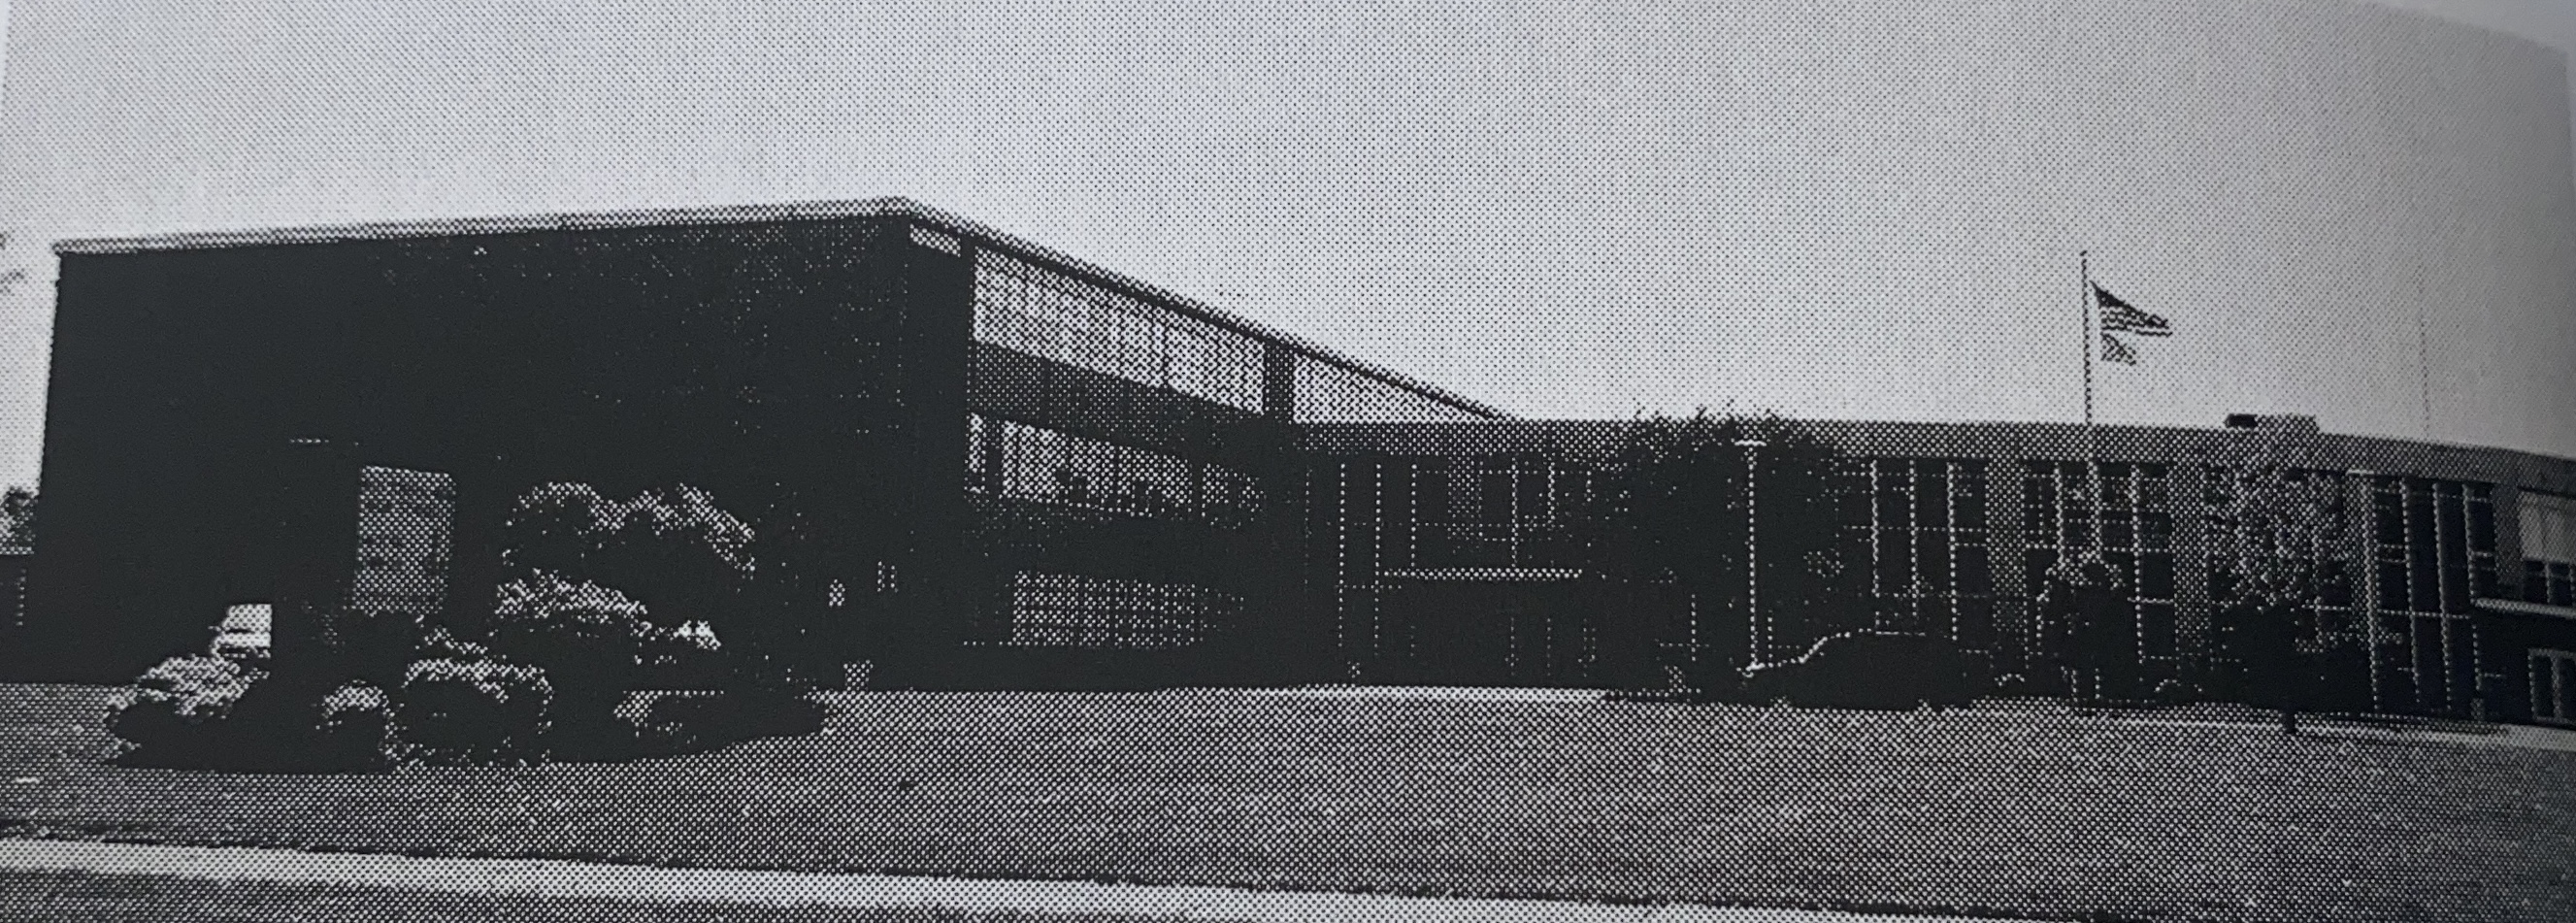 black and white photo of front of building and school sign 